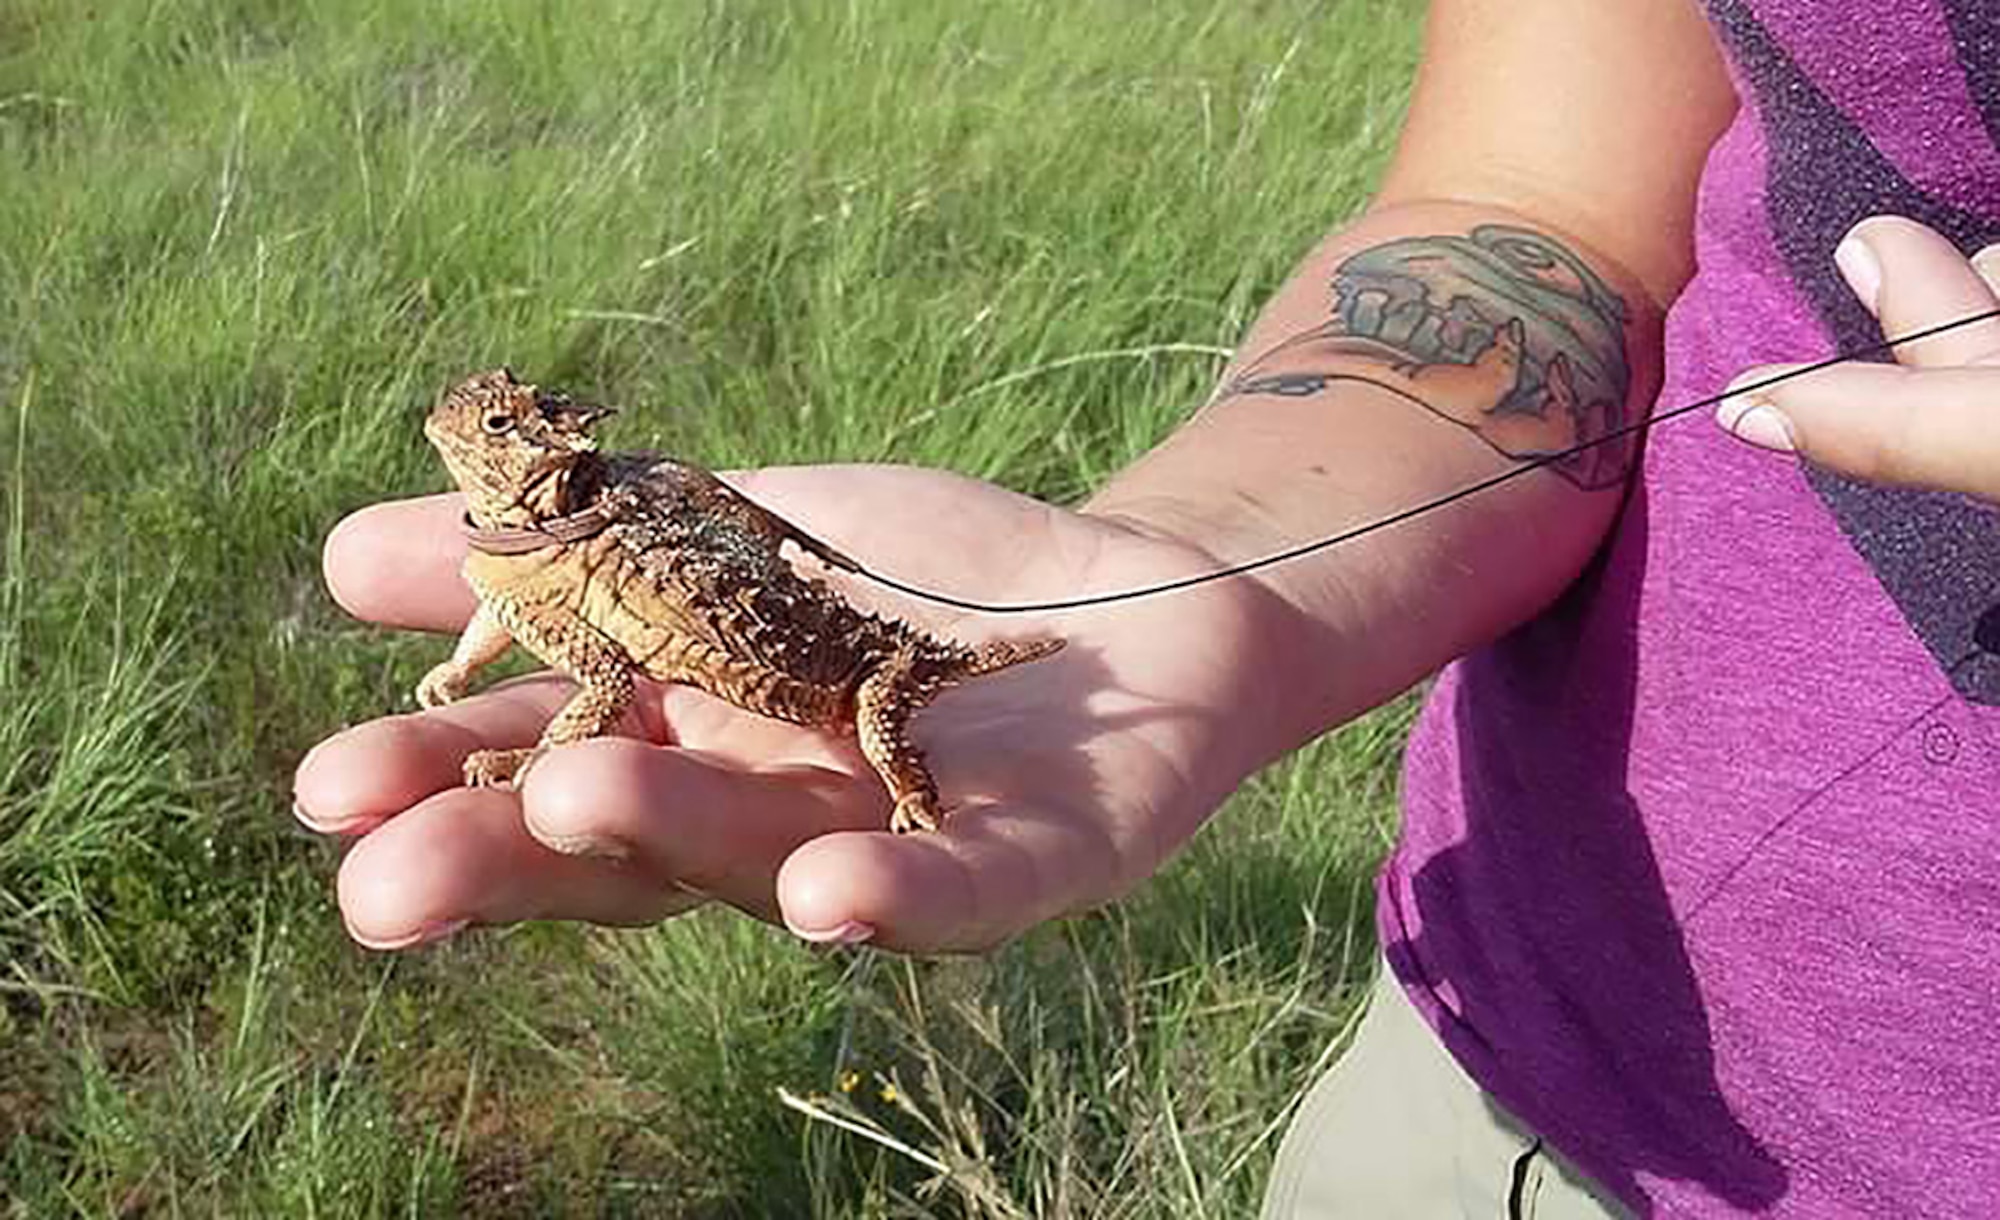 Miranda Vesy, a Southern Illinois University employee who works on lizard research at Tinker Air Force Base, holds a Texas horned lizard that has been fitted with a tracking device. Members of the 72nd Air Base Wing Civil Engineering Squadron’s Natural Resources team attach the transmitters to the lizards with temporary adhesive, then release the lizard back into the grasslands on Tinker. The lizards don’t stray far, but their camouflage and small size make locating them a learned feat for researchers. (Air Force photo by Marlin Zimmerman)